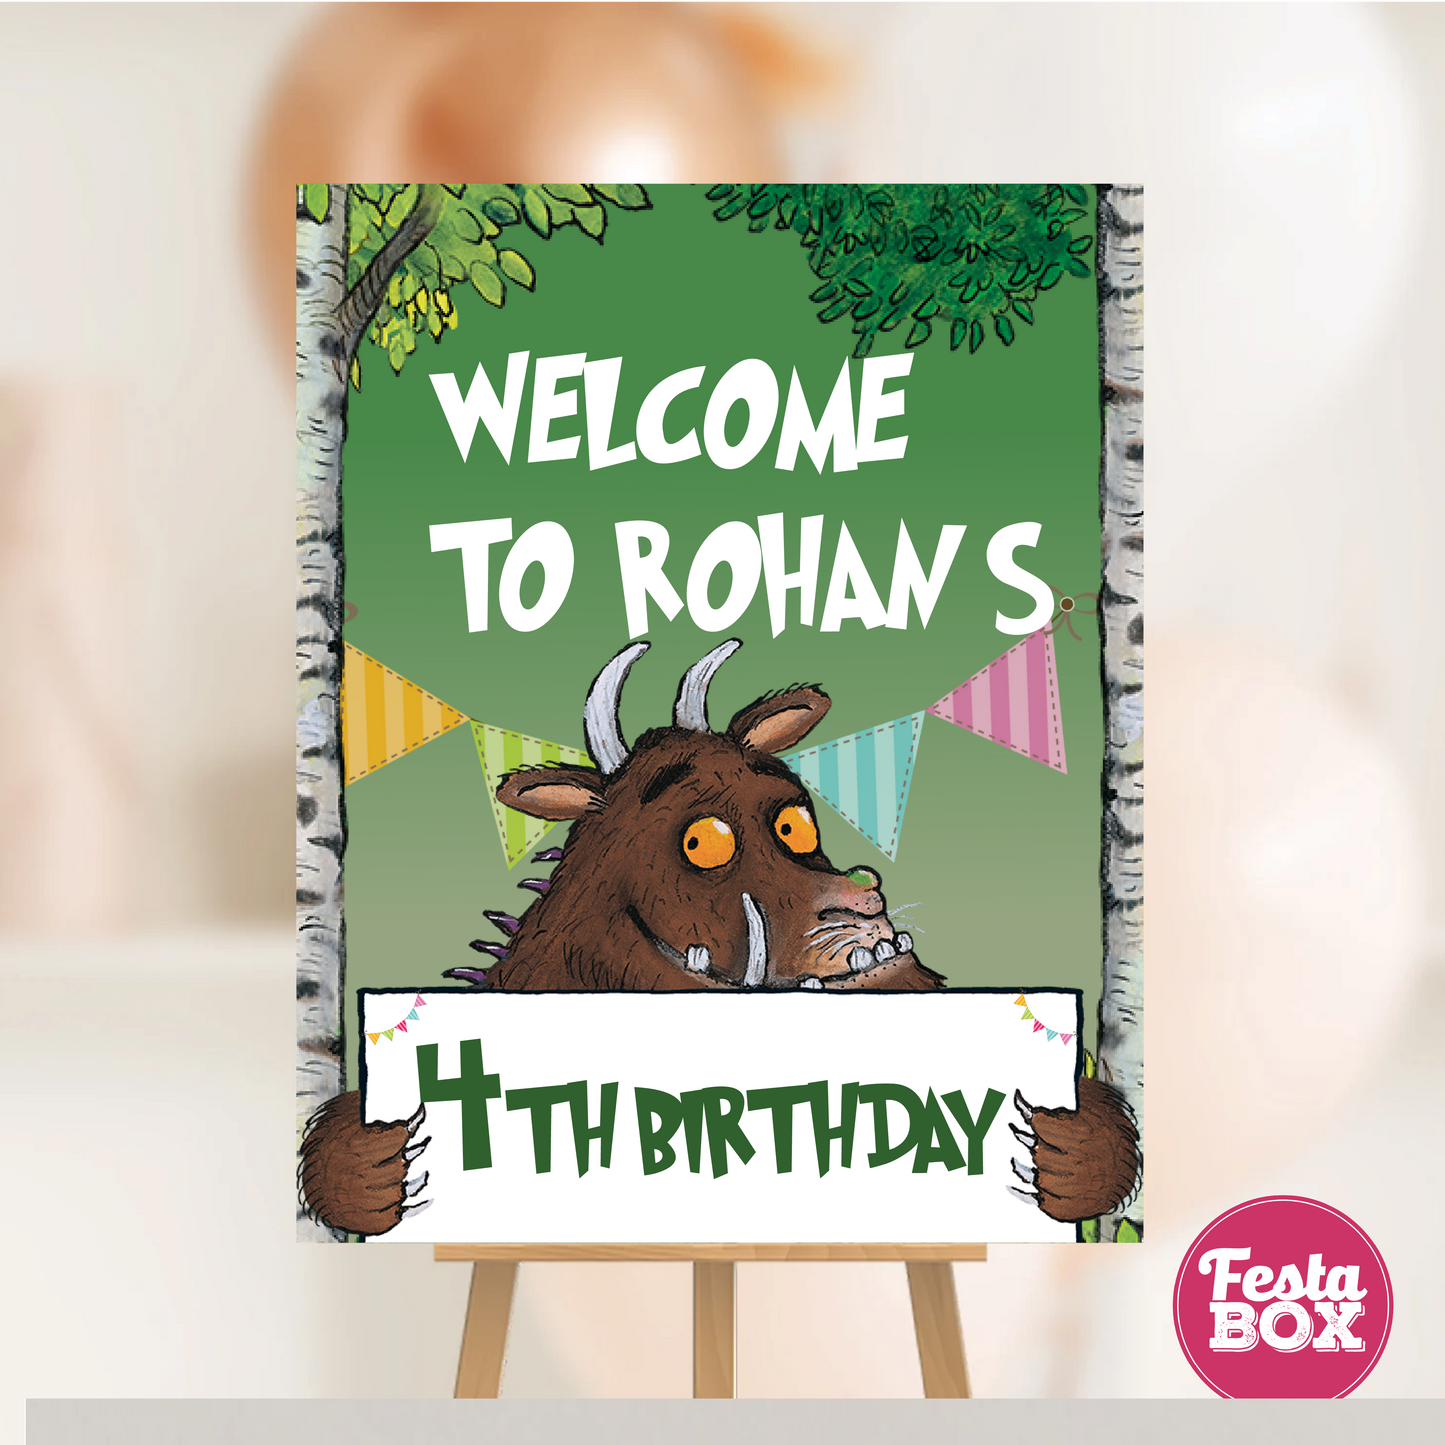 Welcome Sign for Birthday Party Decoration - Gruffalo Theme 